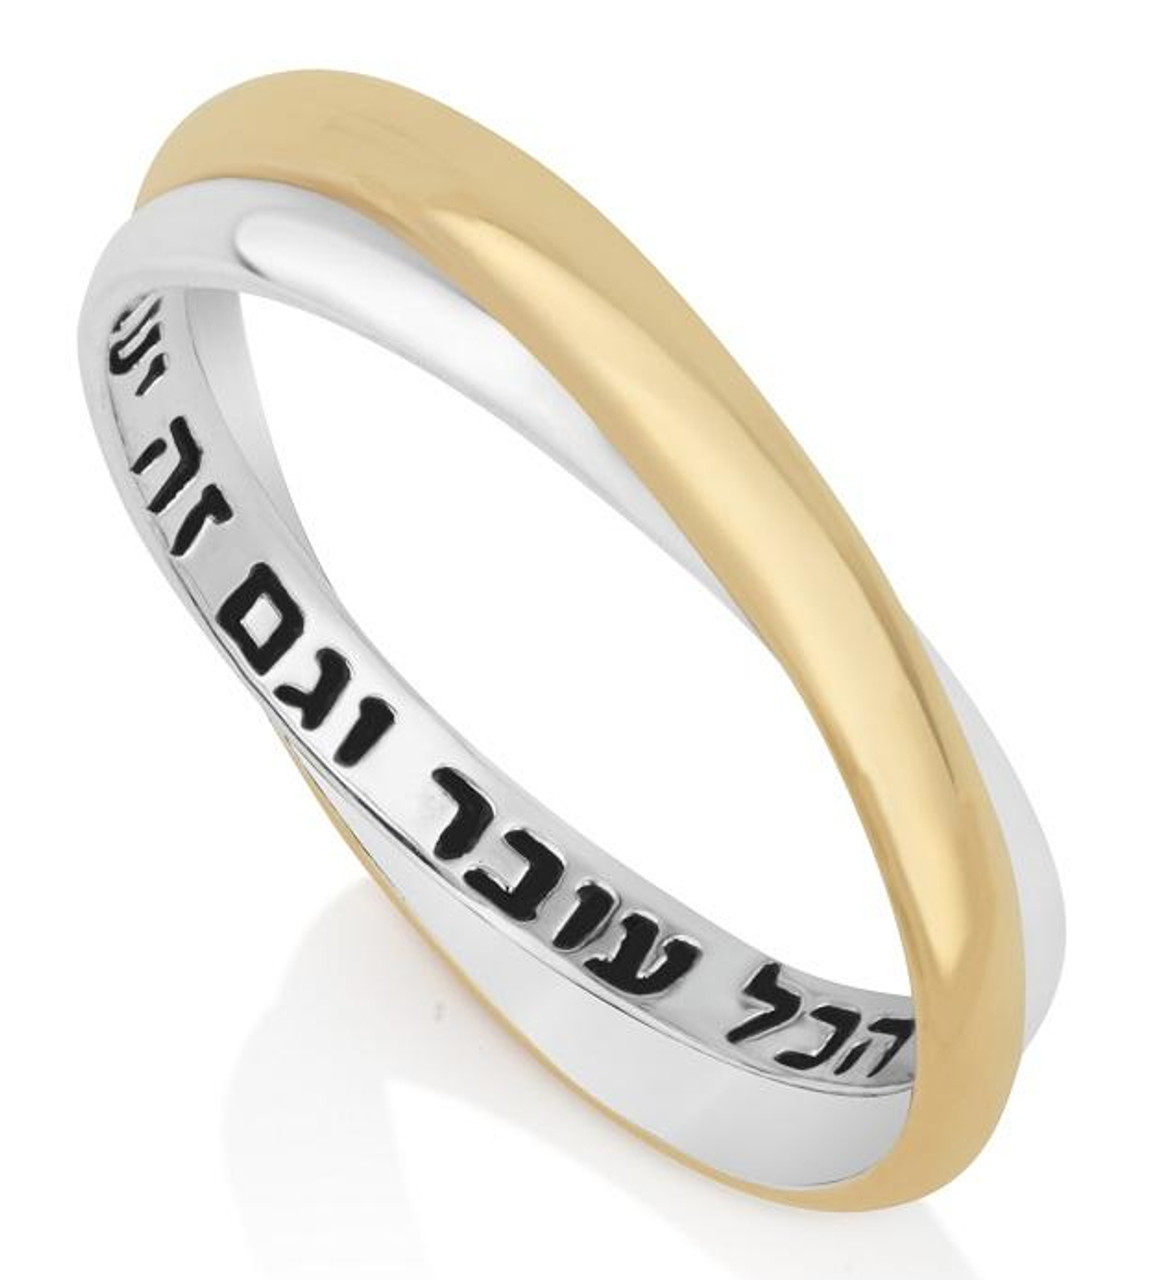 Buy This Too Shall Pass Silver Band Ring,ring of Inspiration, Gam Zeh  Ya'avor Ring, Silver Hebrew Ring, Jewish Judaica Jewelry Gift Online in  India - Etsy